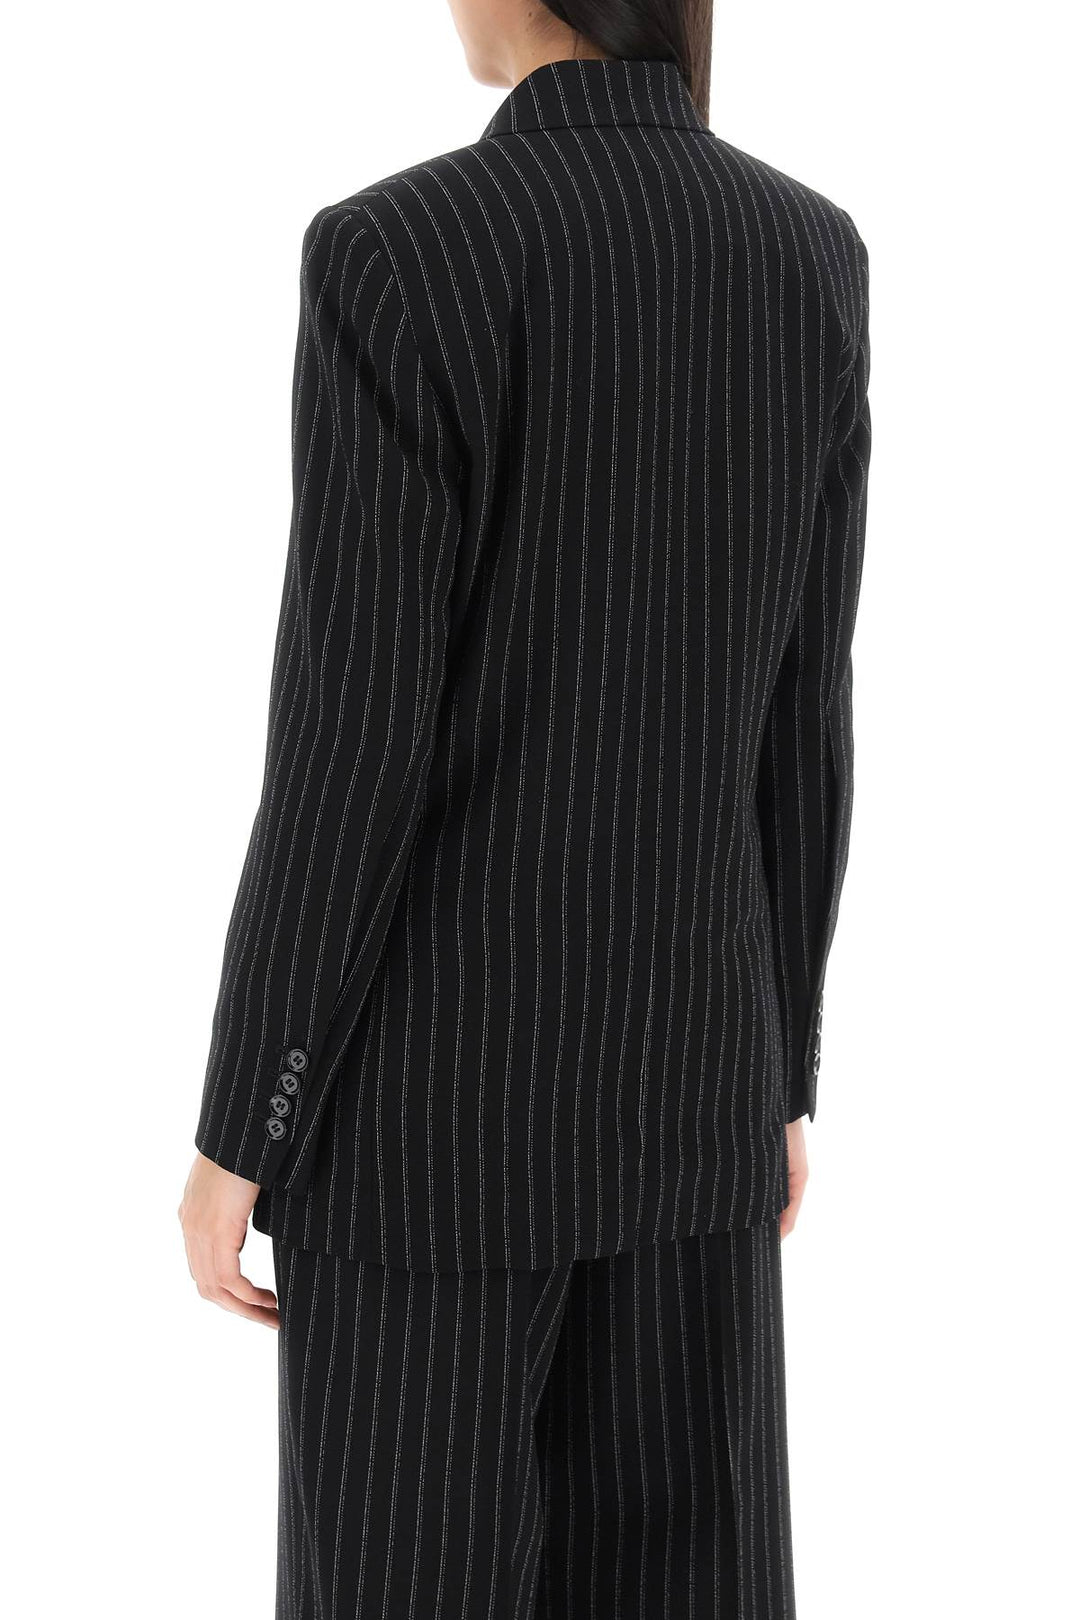 Ami Alexandre Matiussi Double Breasted Pinstripe   Black